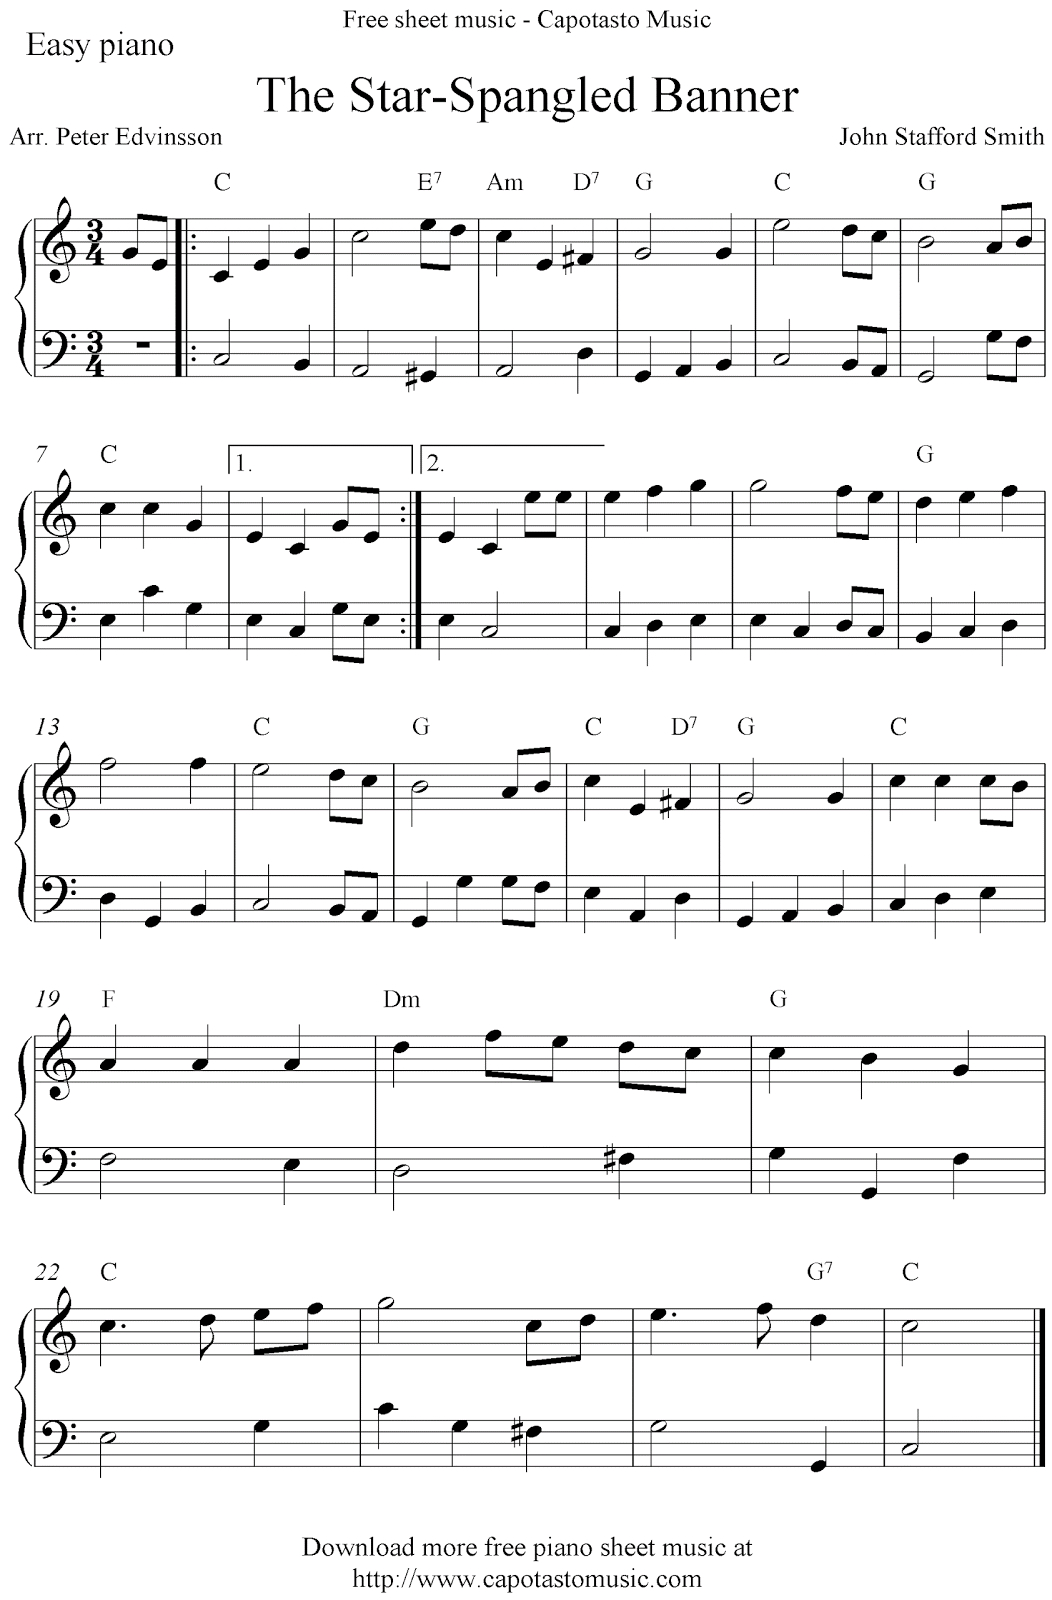 Easy Free Piano Sheet Music Solo Arrangementpeter Edvinsson Of - Free Printable Piano Sheet Music For The Star Spangled Banner